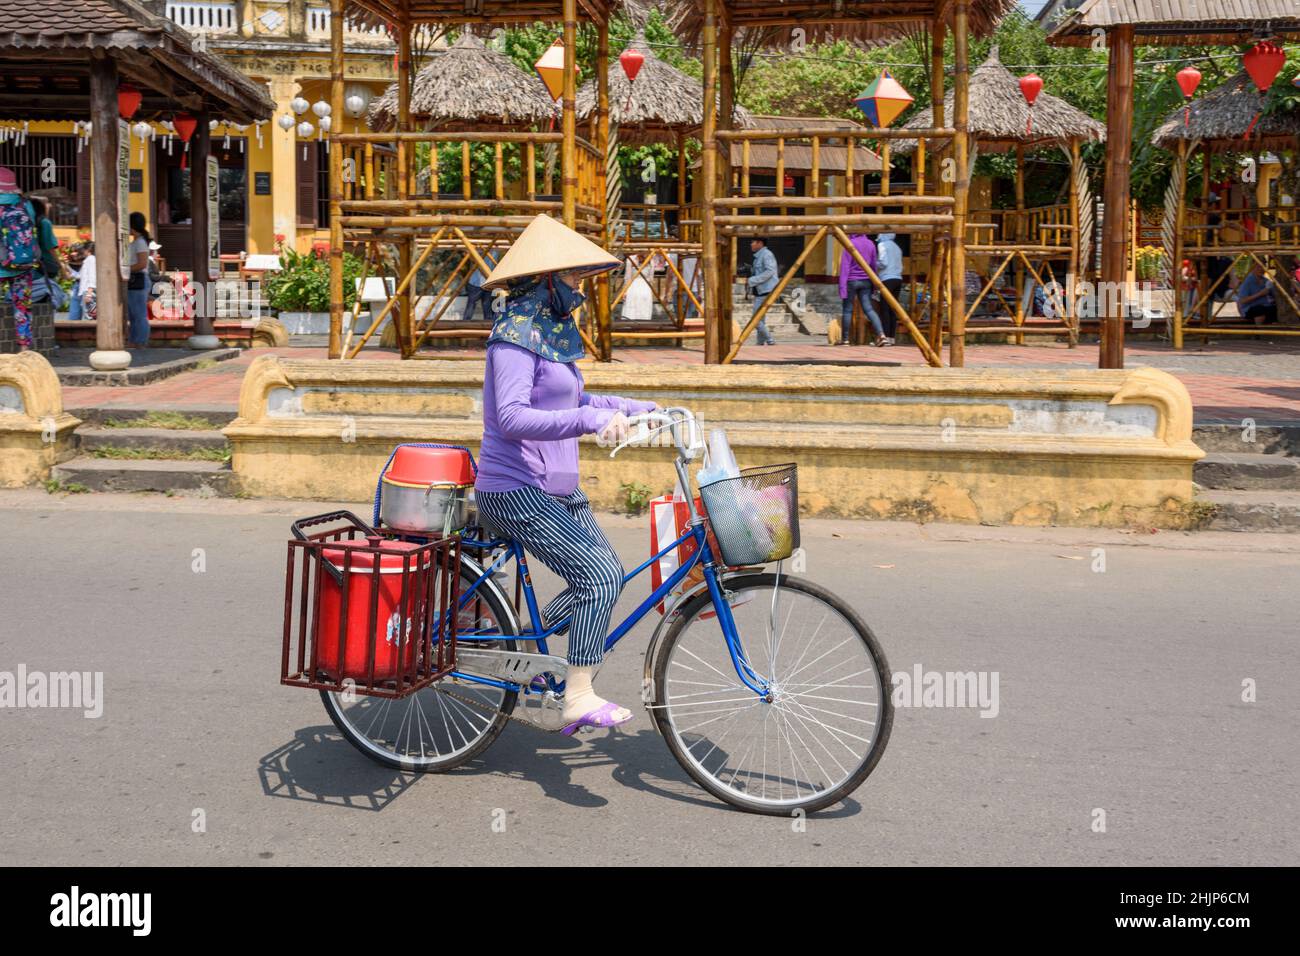 A Vietnamese woman wearing a traditional conical hat rides a bicycle through the streets of Hoi An, Quang Nam province, central Vietnam Stock Photo